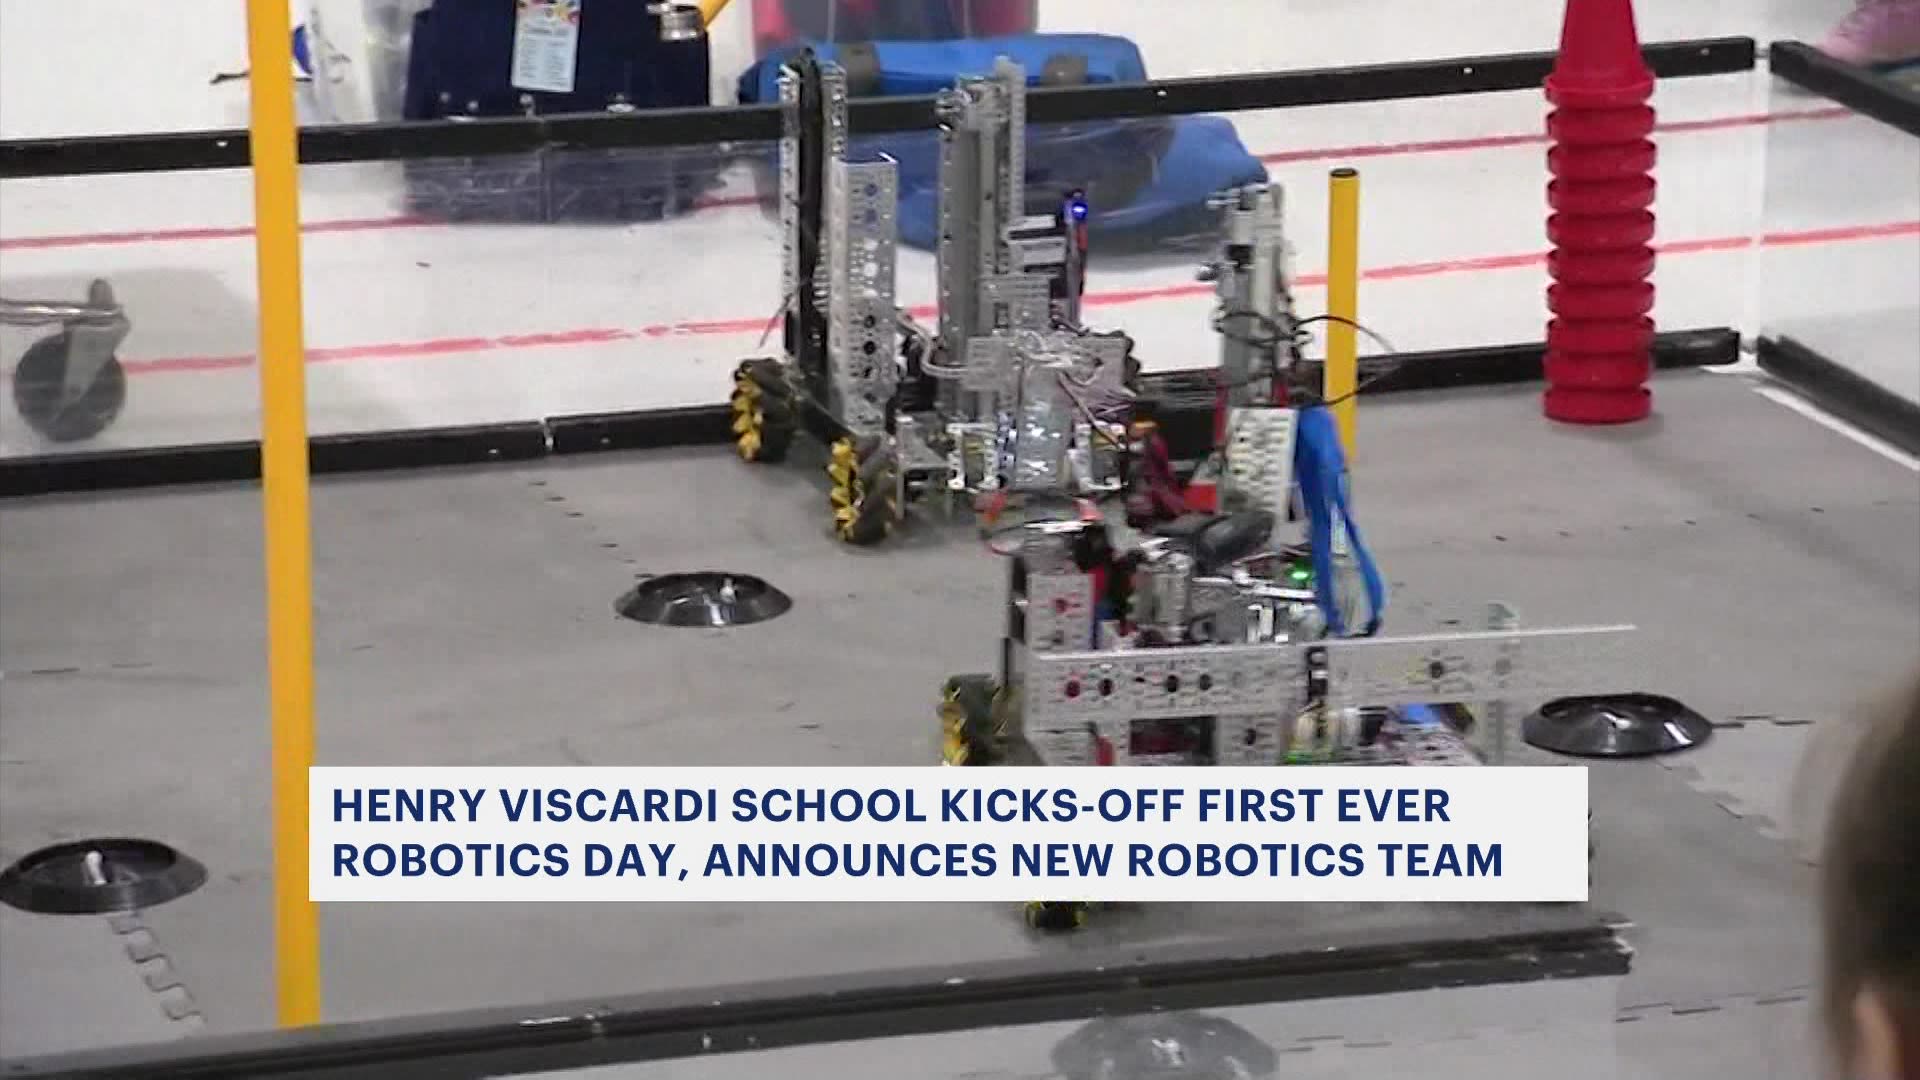 Students learn how to code, build products at Henry Viscardi School’s Robotics Day - Image